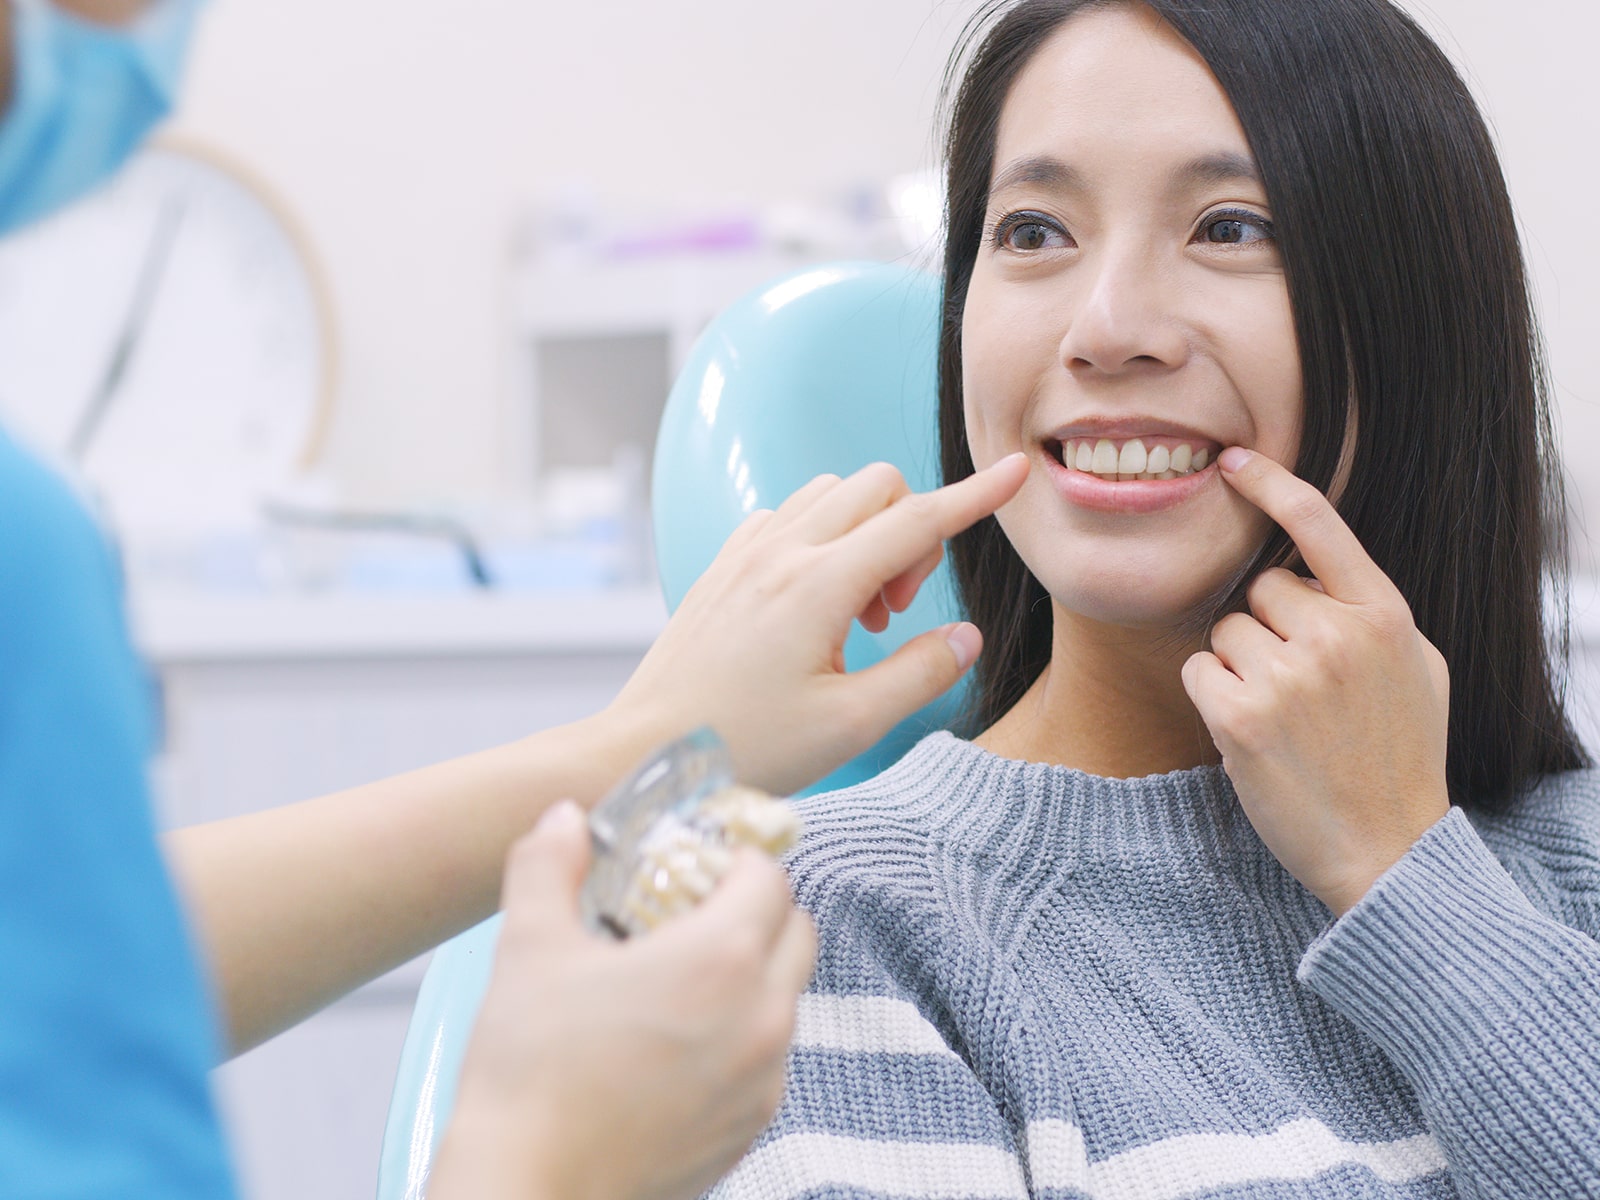 How Much Tooth Is Needed For A Dental Crown?